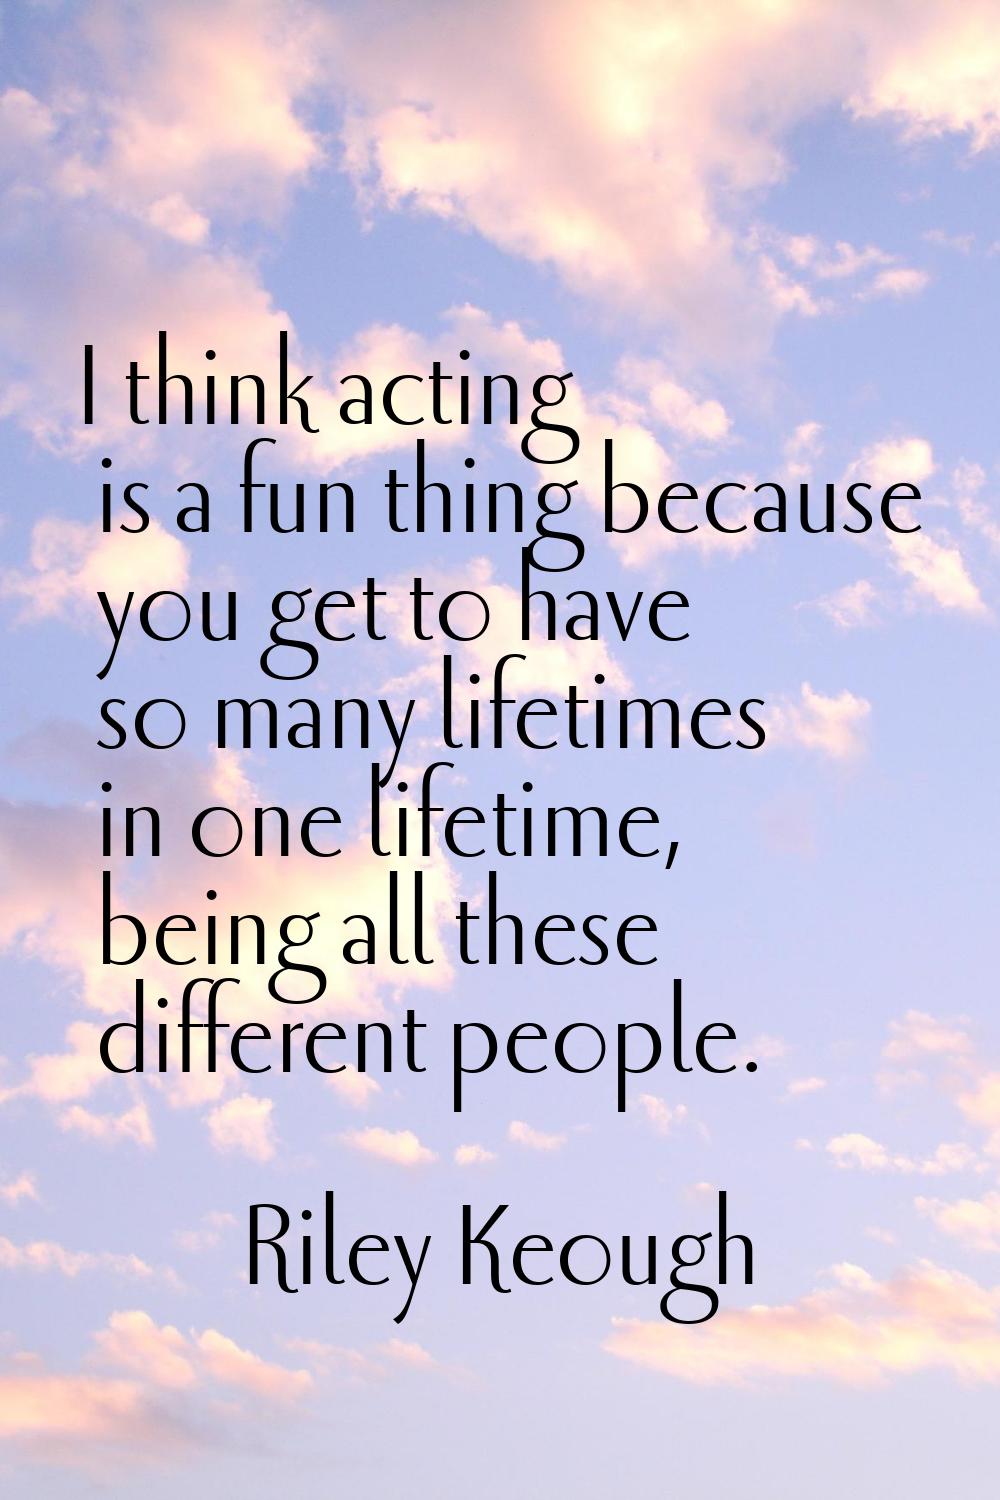 I think acting is a fun thing because you get to have so many lifetimes in one lifetime, being all 